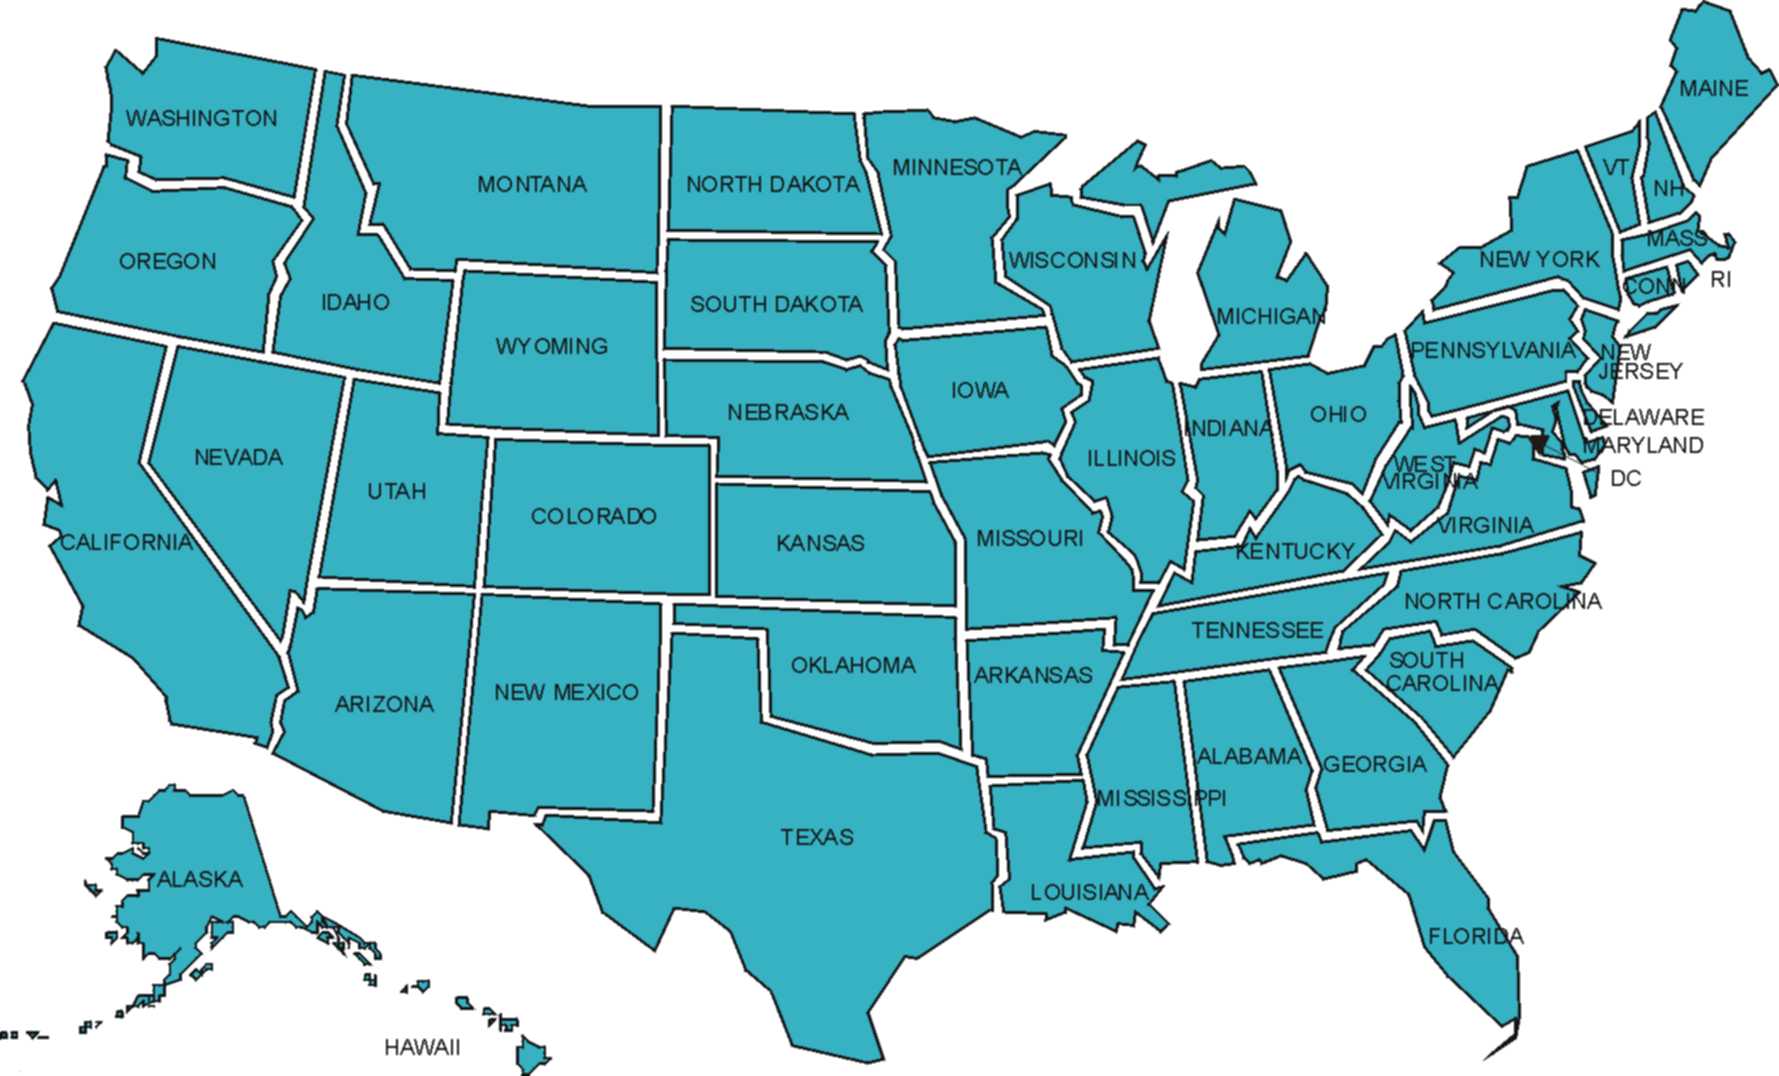 7-best-images-of-printable-of-usa-states-shapes-map-with-state-names